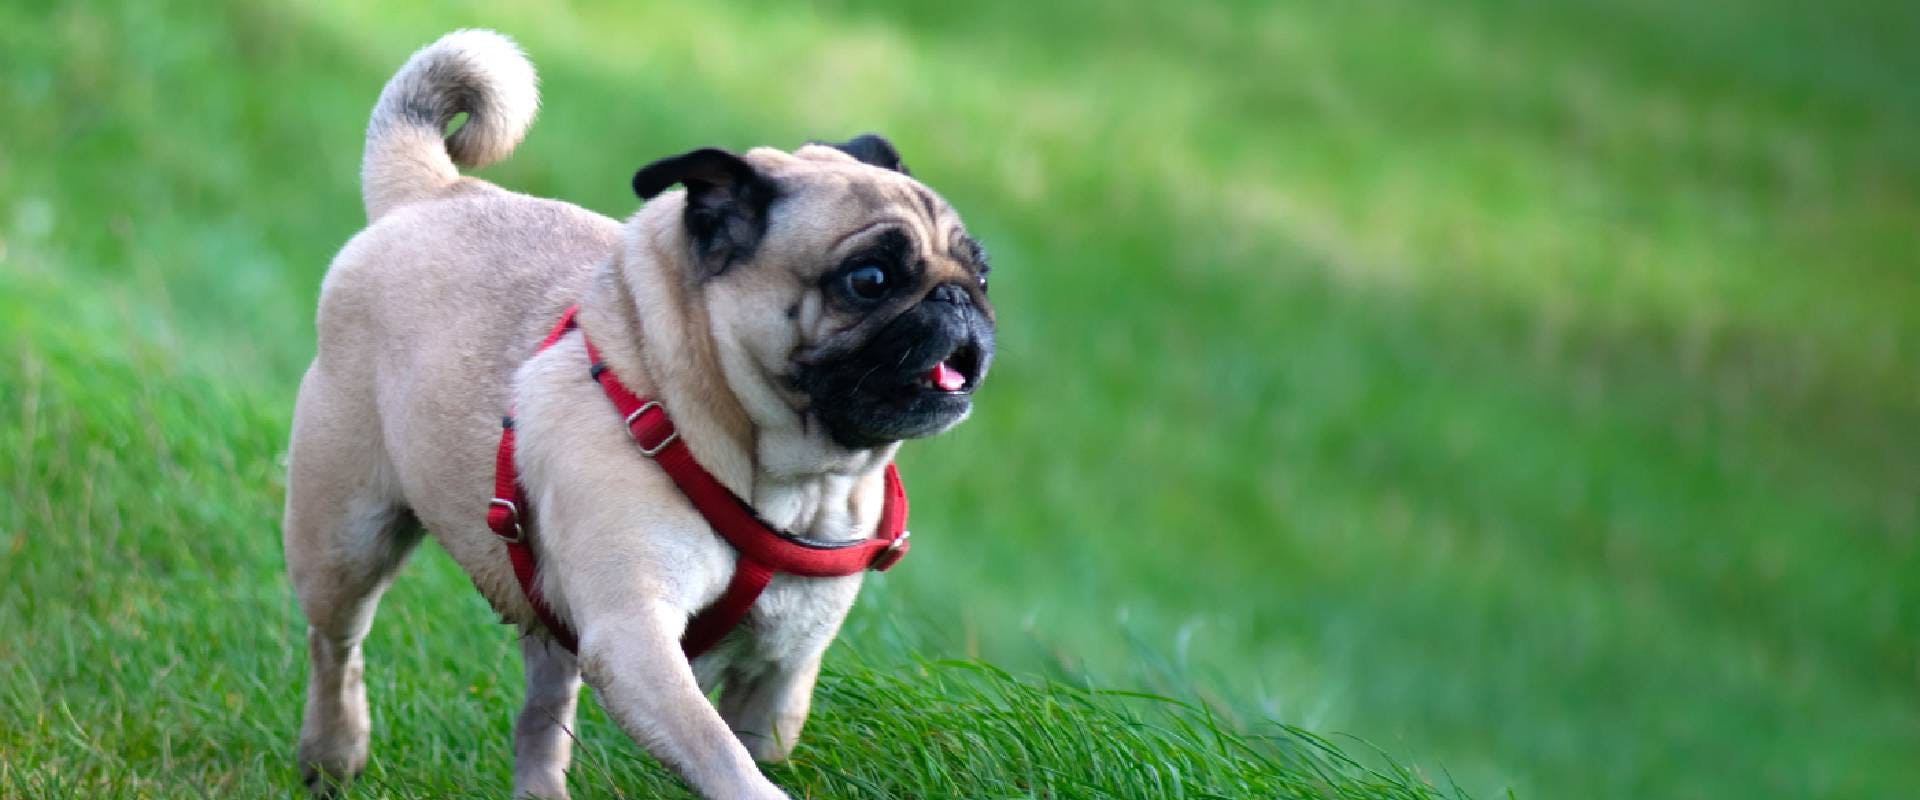 Pug wearing a red harness walking on grass